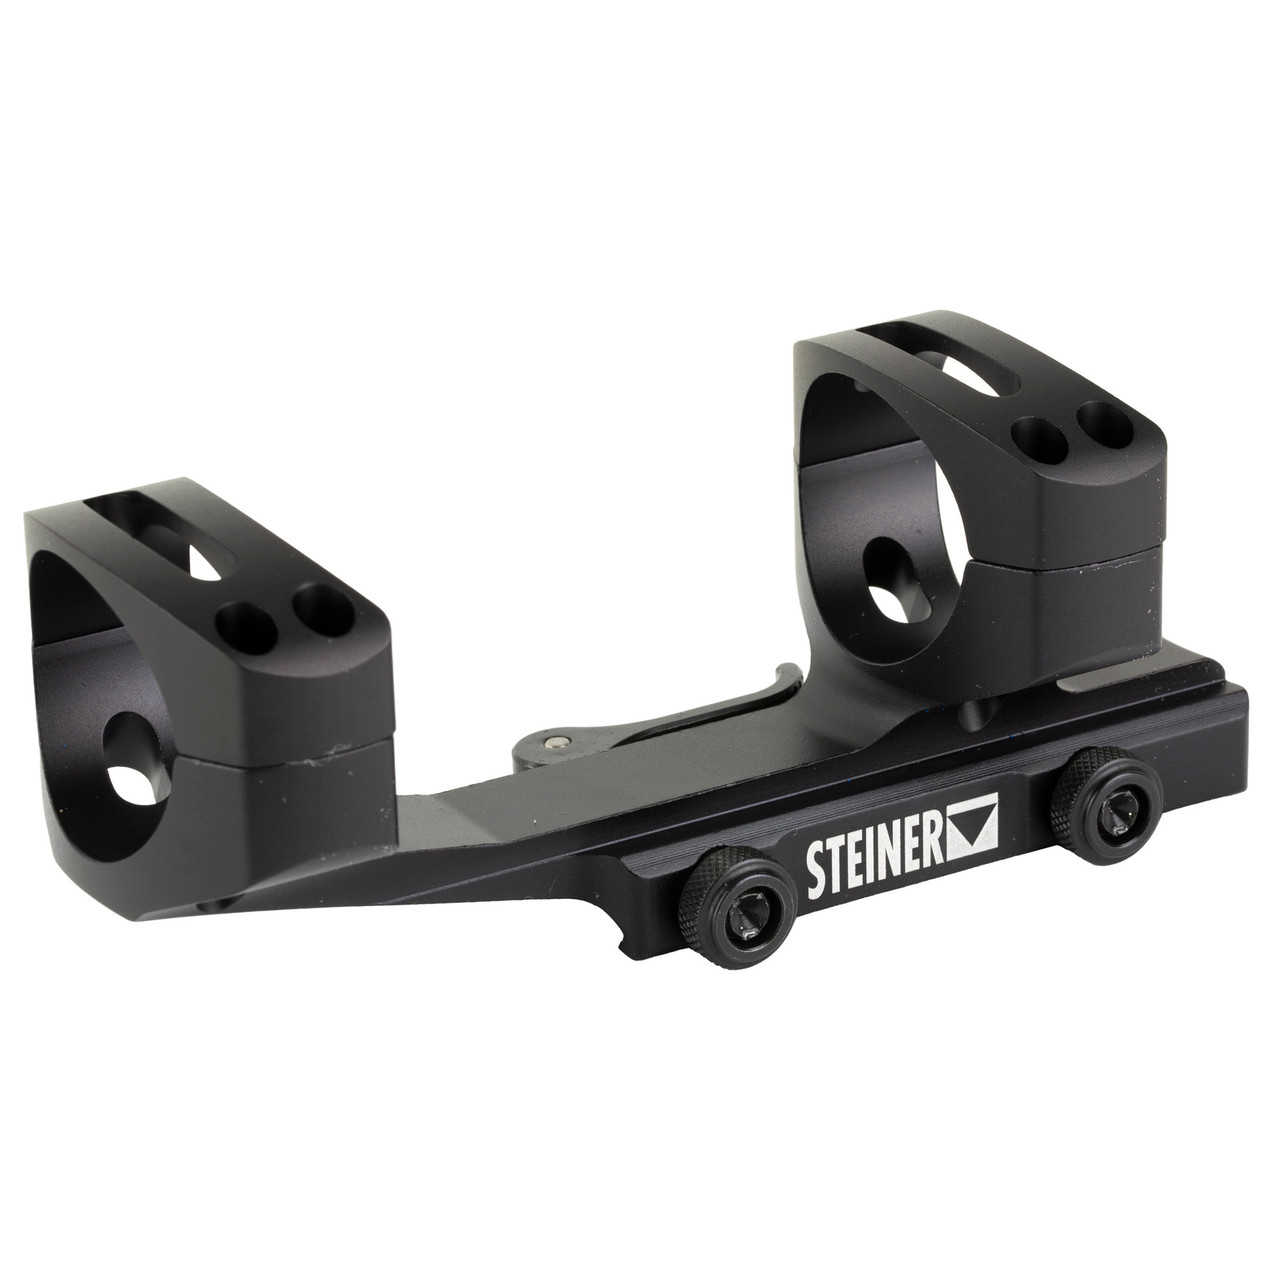 Steiner 5976 P Series, 1 Piece Scope Mount, Quick Disconnect, 34mm, Black, Fits Picatinny